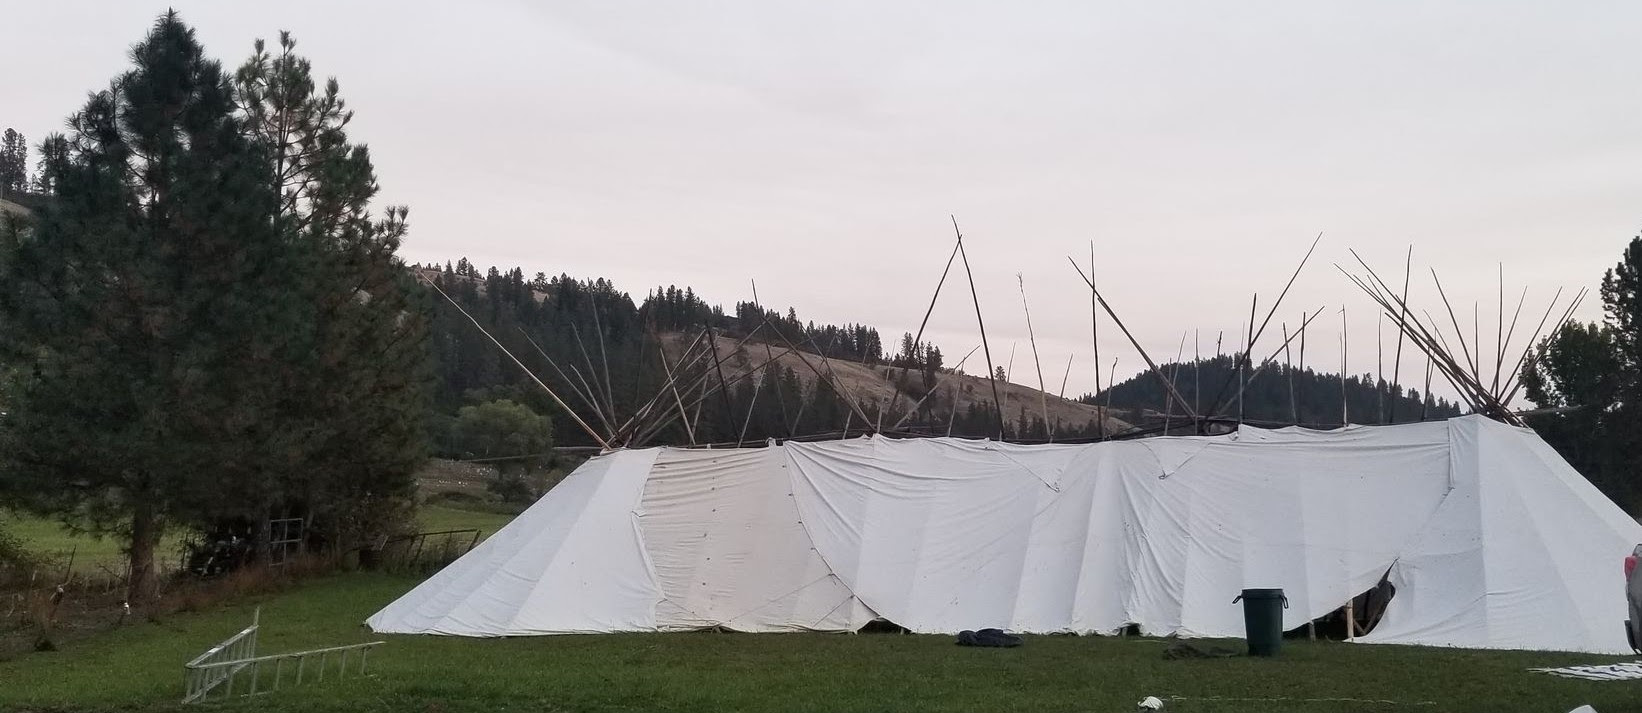 The Long Tent